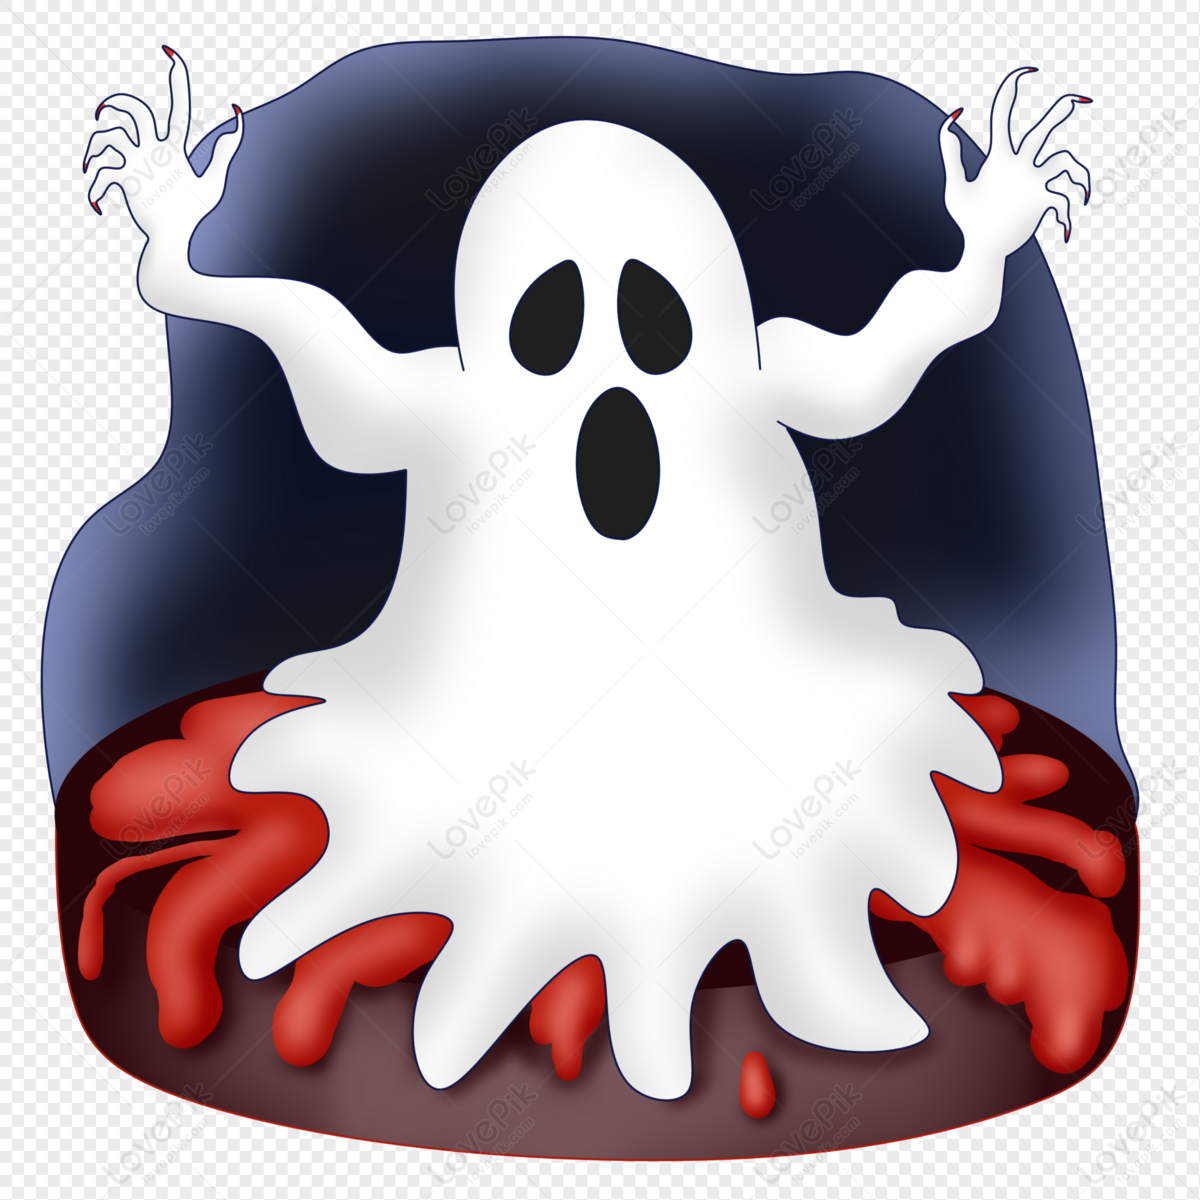 Ghost PNG Image And Clipart Image For Free Download - Lovepik | 401509638